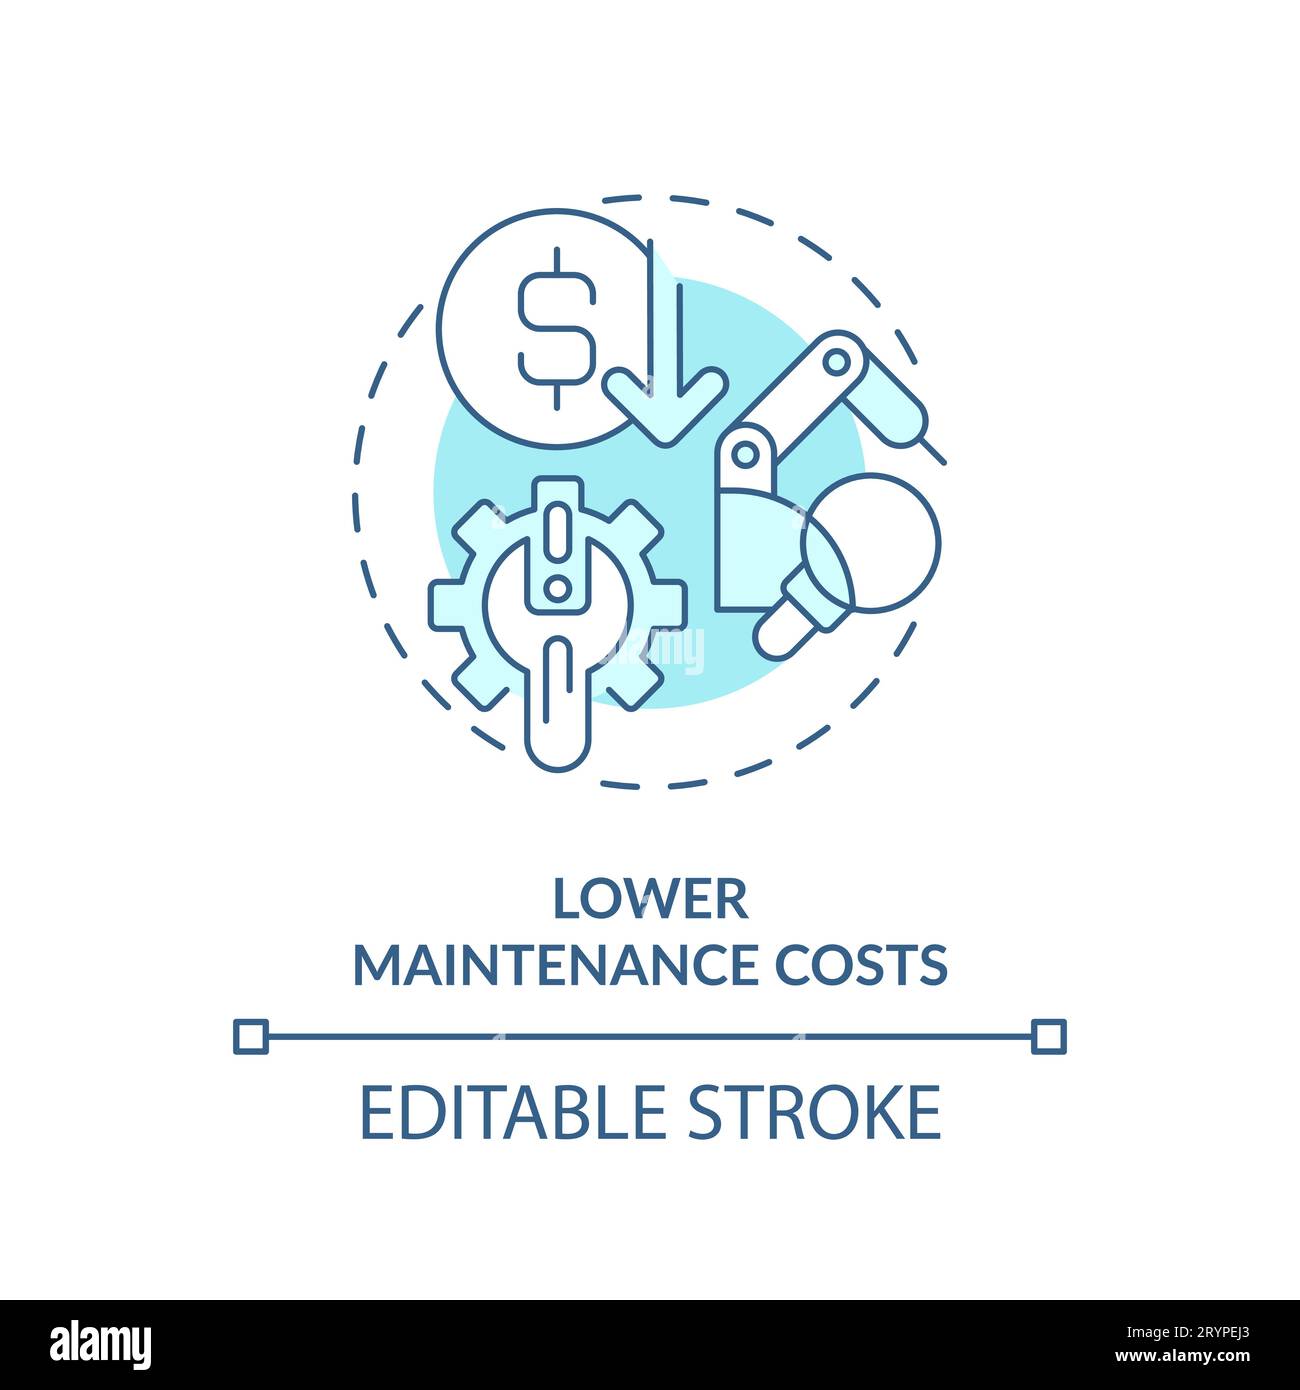 2D thin linear icon lower maintenance costs concept Stock Vector